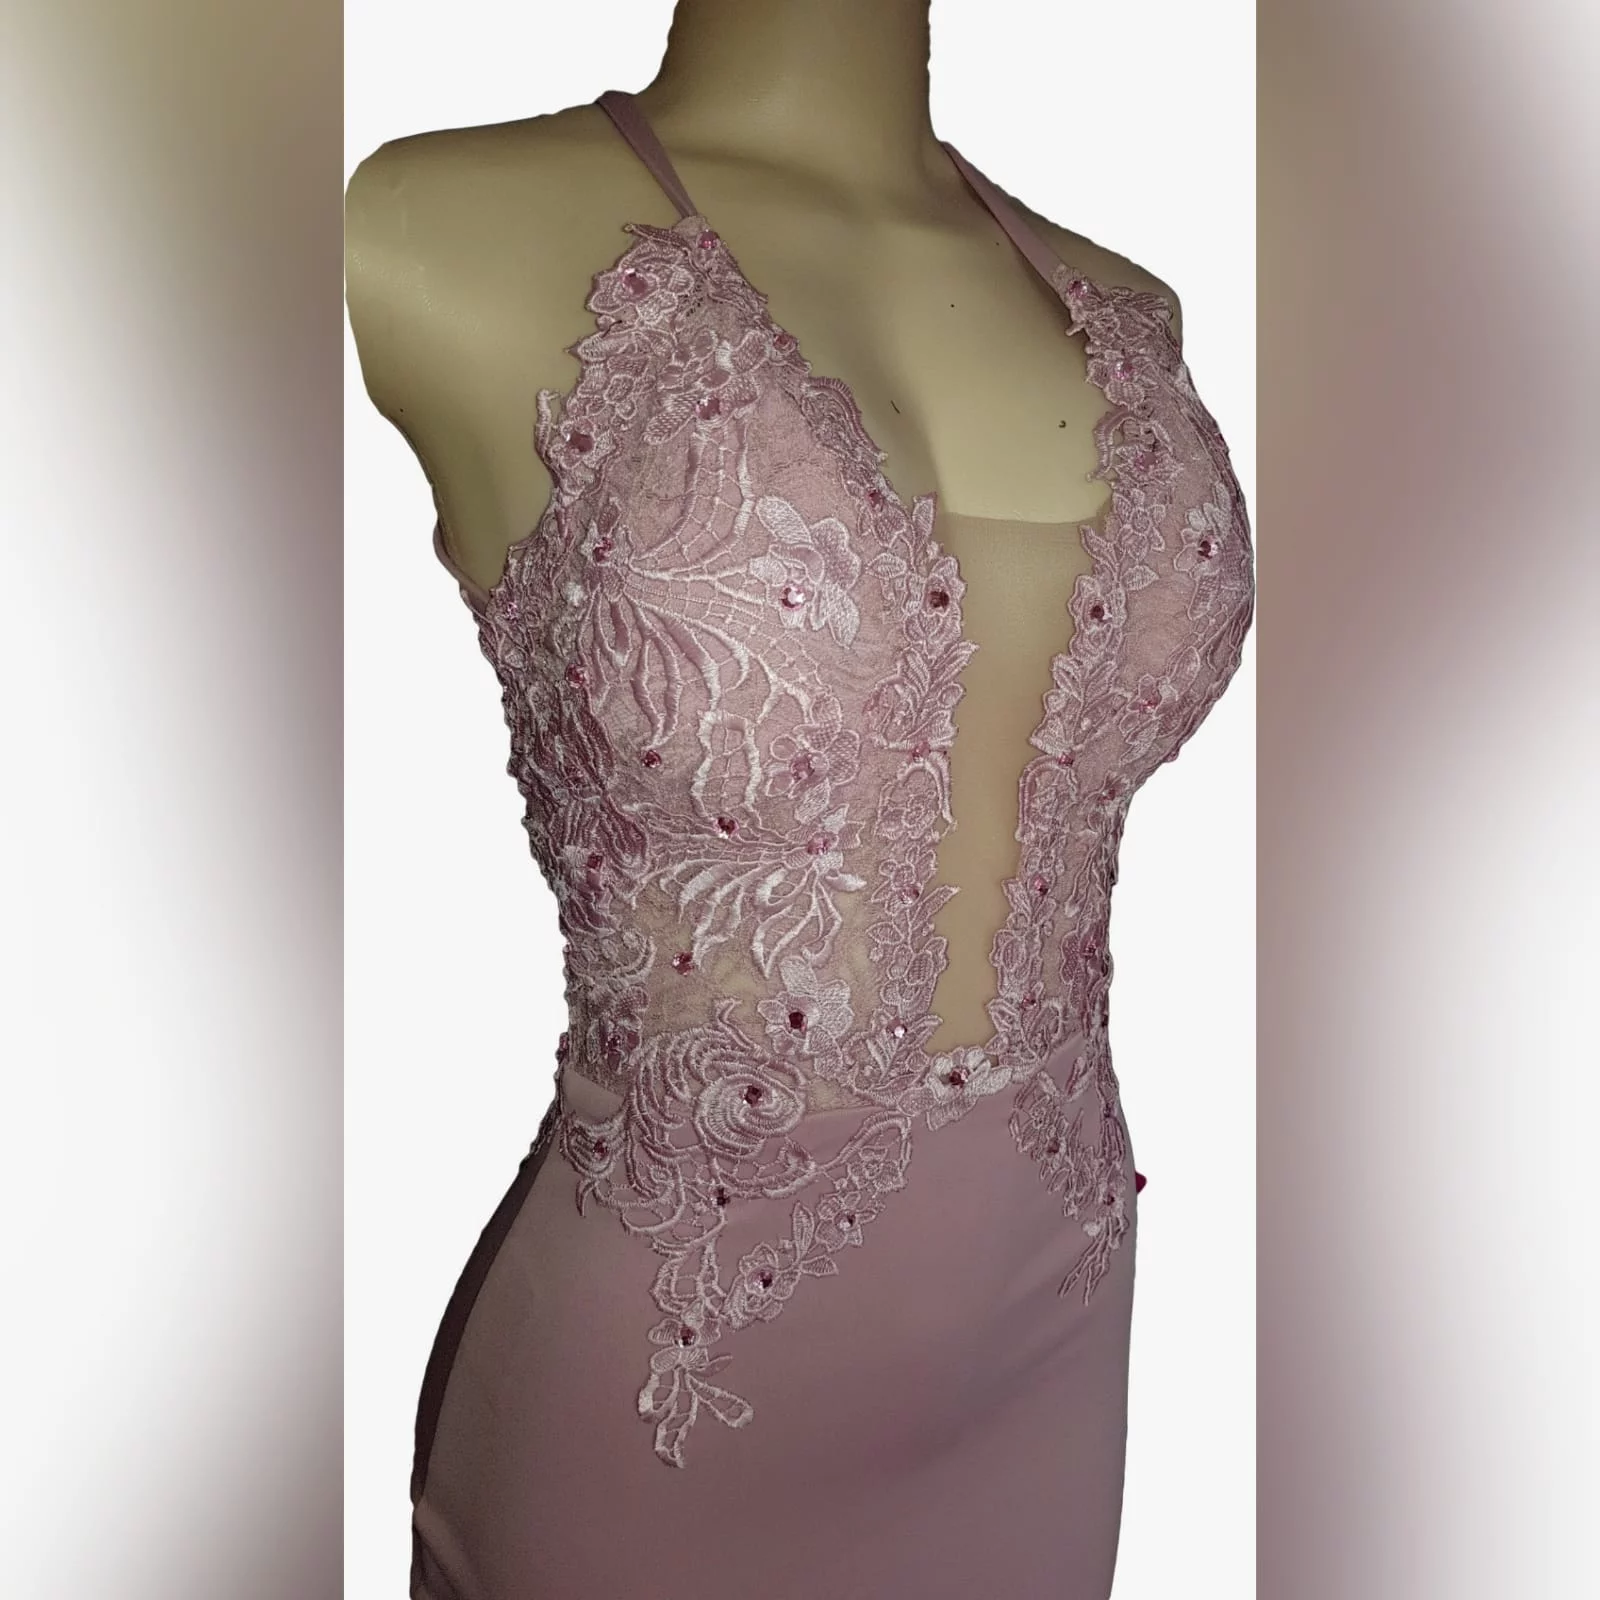 Pink sexy soft mermaid matric dance dress 2 look ravishing on your prom night with this pink sexy soft mermaid pink sexy soft mermaid matric dance dress. A fitted lace bodice with a plunging neckline, low back and a train to add some glamour to your important event.